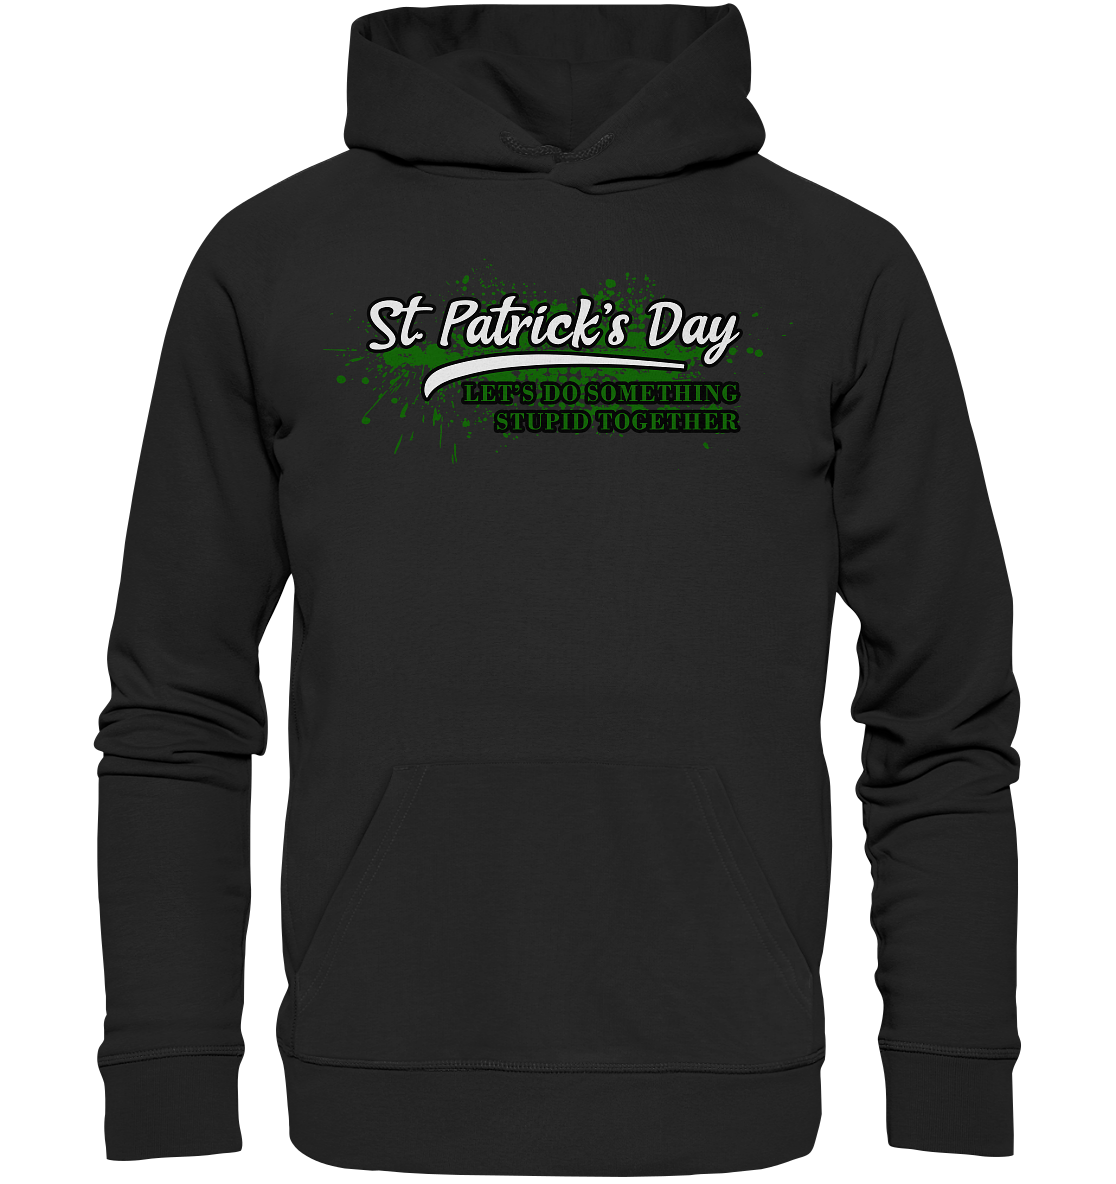 St. Patrick's Day "Let's Do Something Stupid Together" - Premium Unisex Hoodie